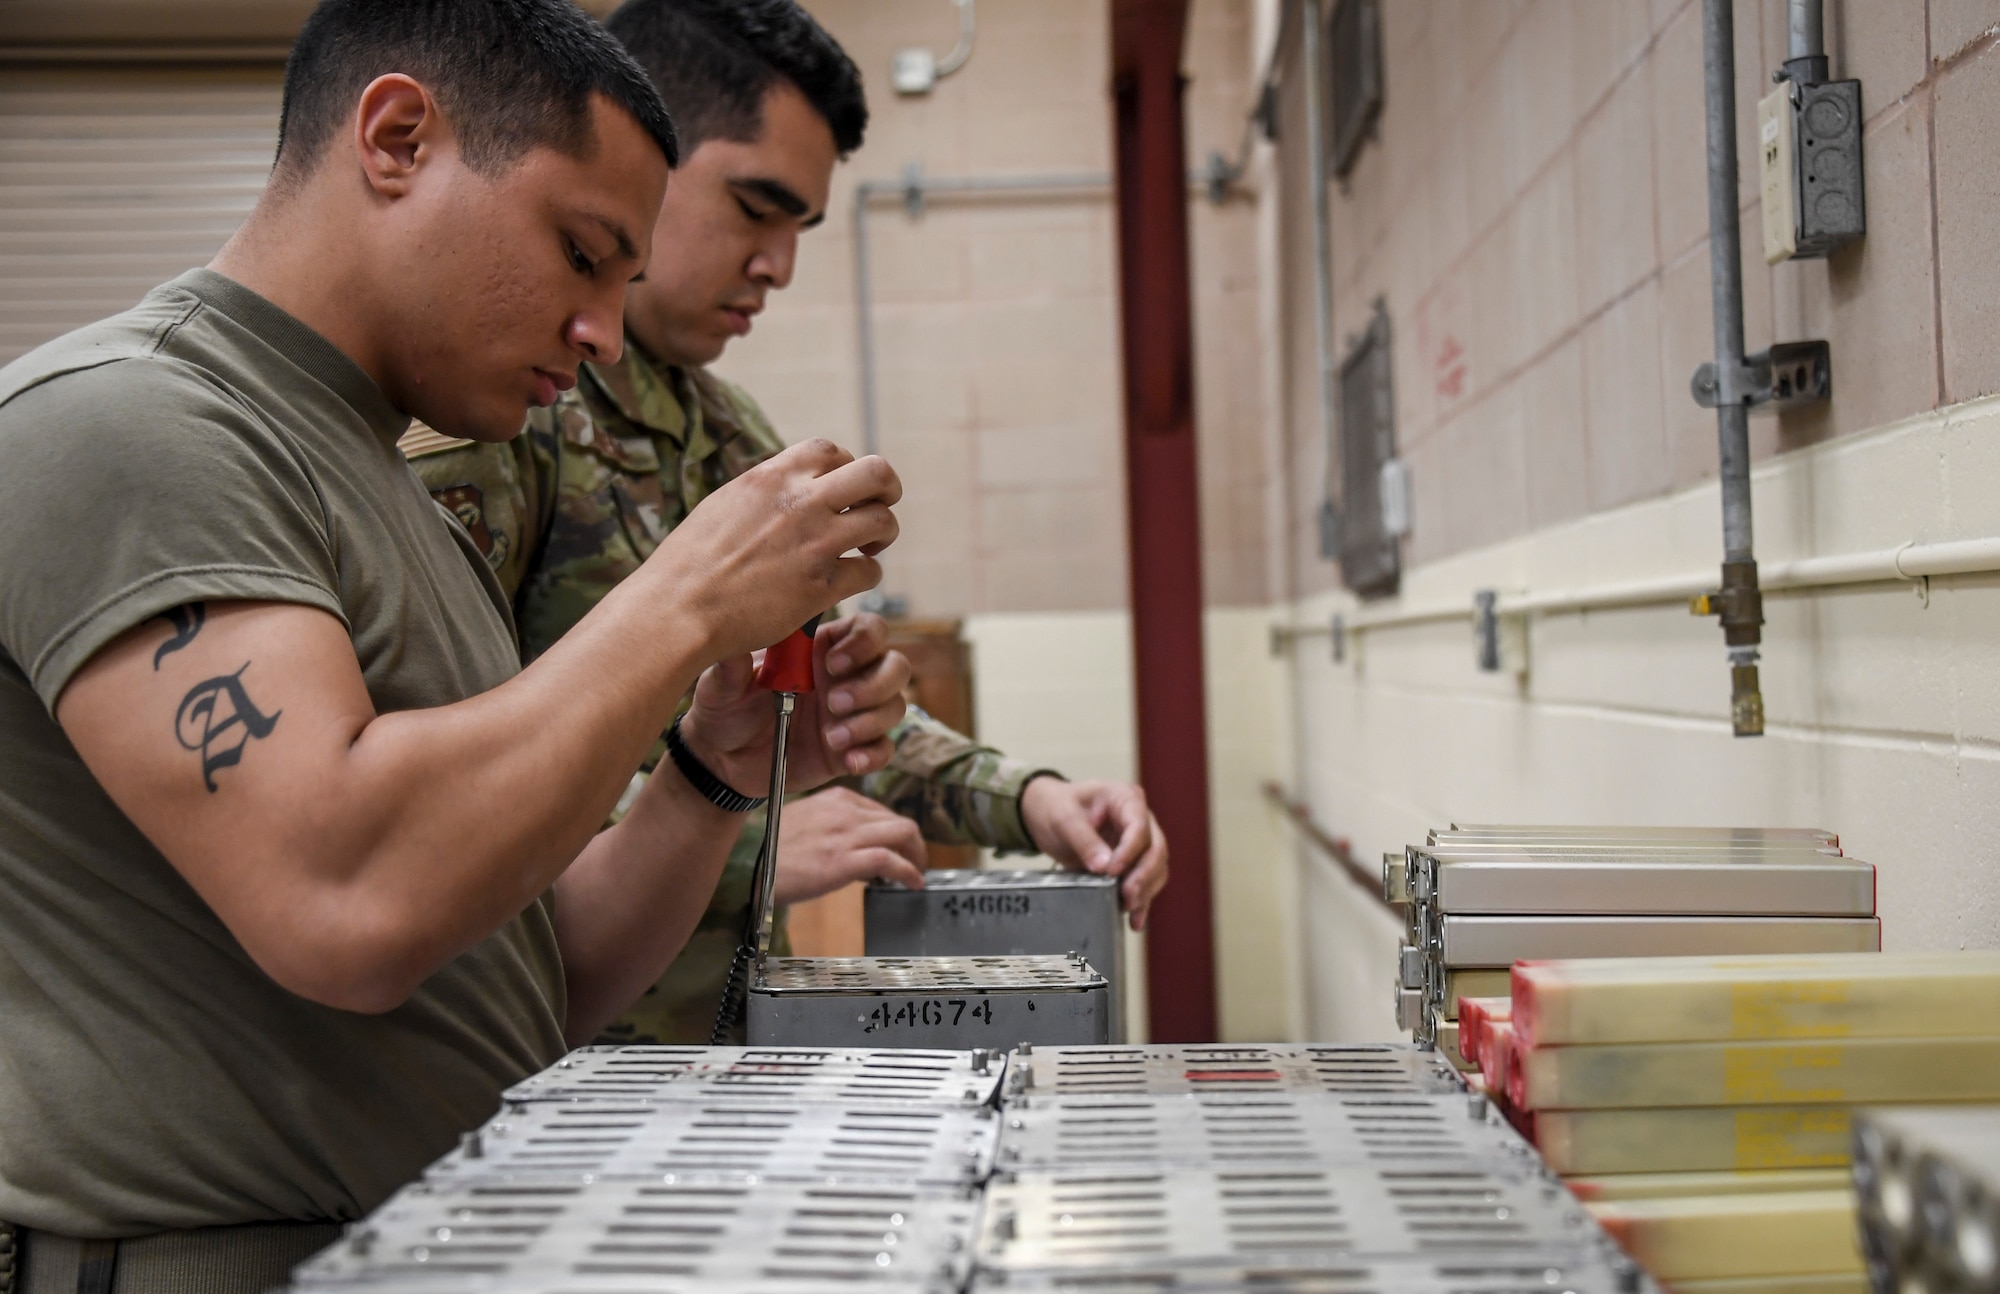 Airman 1st Class Anthony Acosta and Airman 1st Class John Aldecoa, 144th Maintenance Squadron, breaks down countermeasures to be stored and shipped back to Fresno, California, during the exercise Checkered Flag, Tyndall Air Force Base, Florida, Nov. 9, 2020.